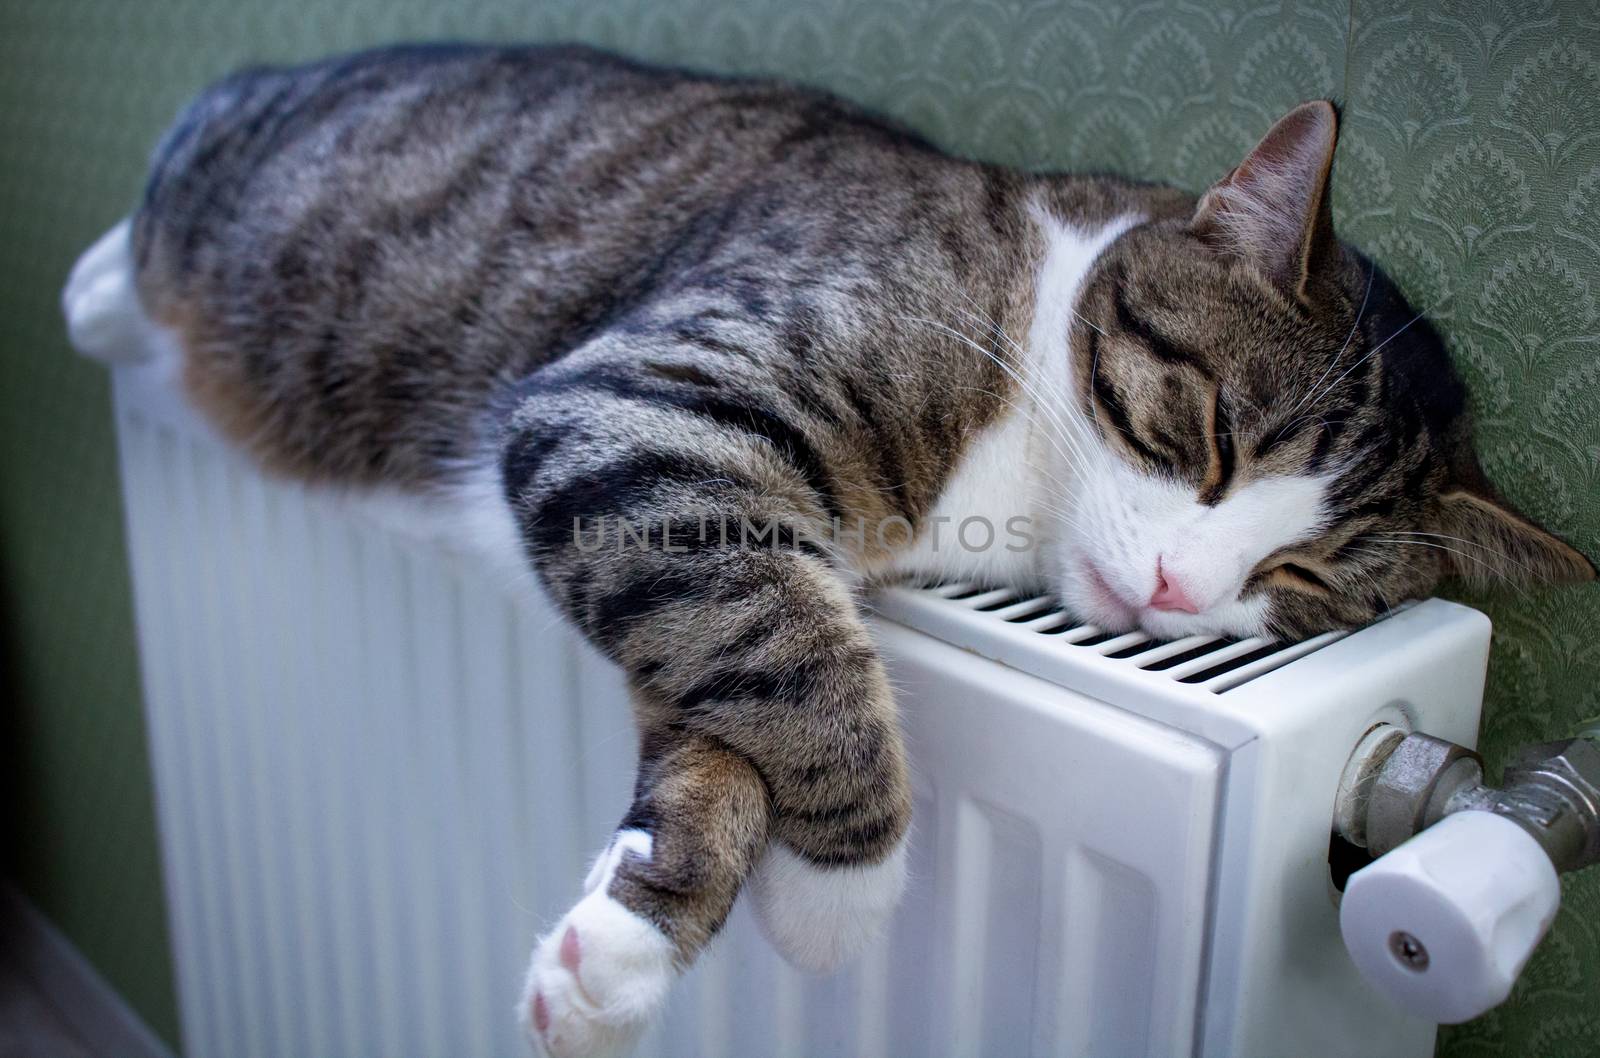 Furry striped pet cat lying on warm radiator rests by VeraVerano